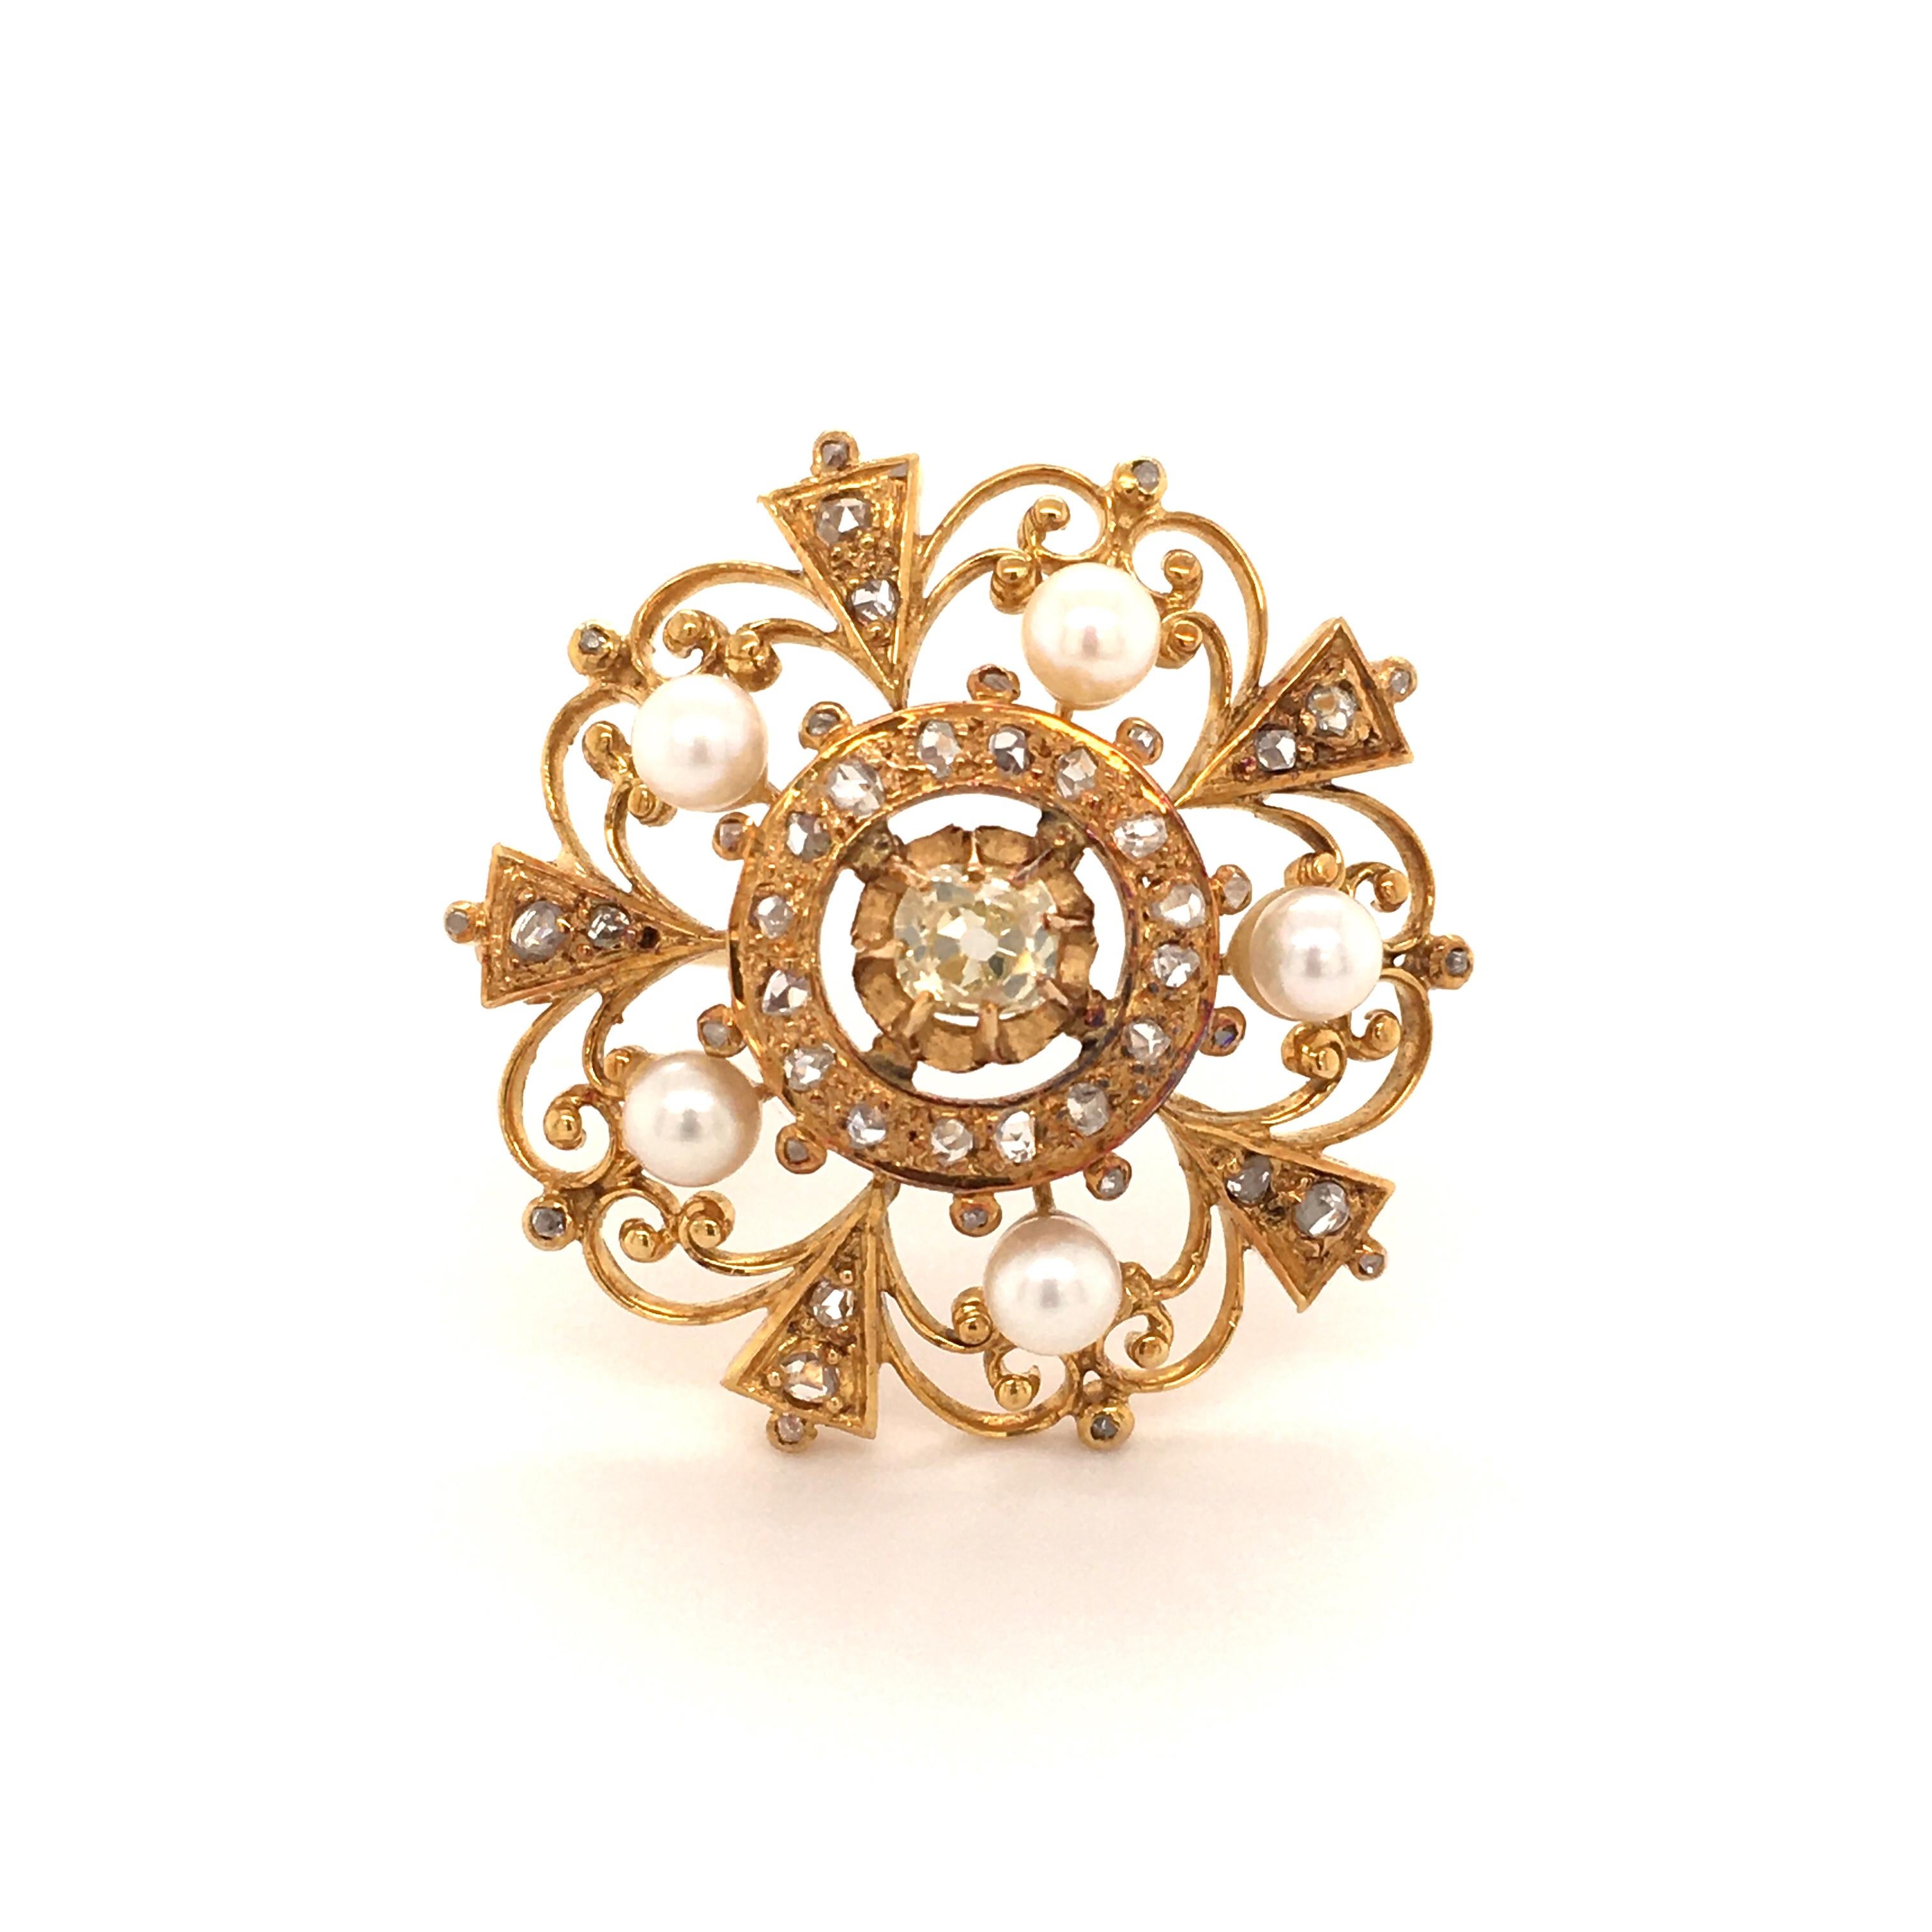 Nice brooch from the Victorian area in yellow gold 750. One old cut diamond of 0.40 ct surrounded by 46 rose cut diamonds and 5 (probably cultured) pearls of 4mm in diameter. 
The brooch is equipped with two loops so the jewel can also be worn as a